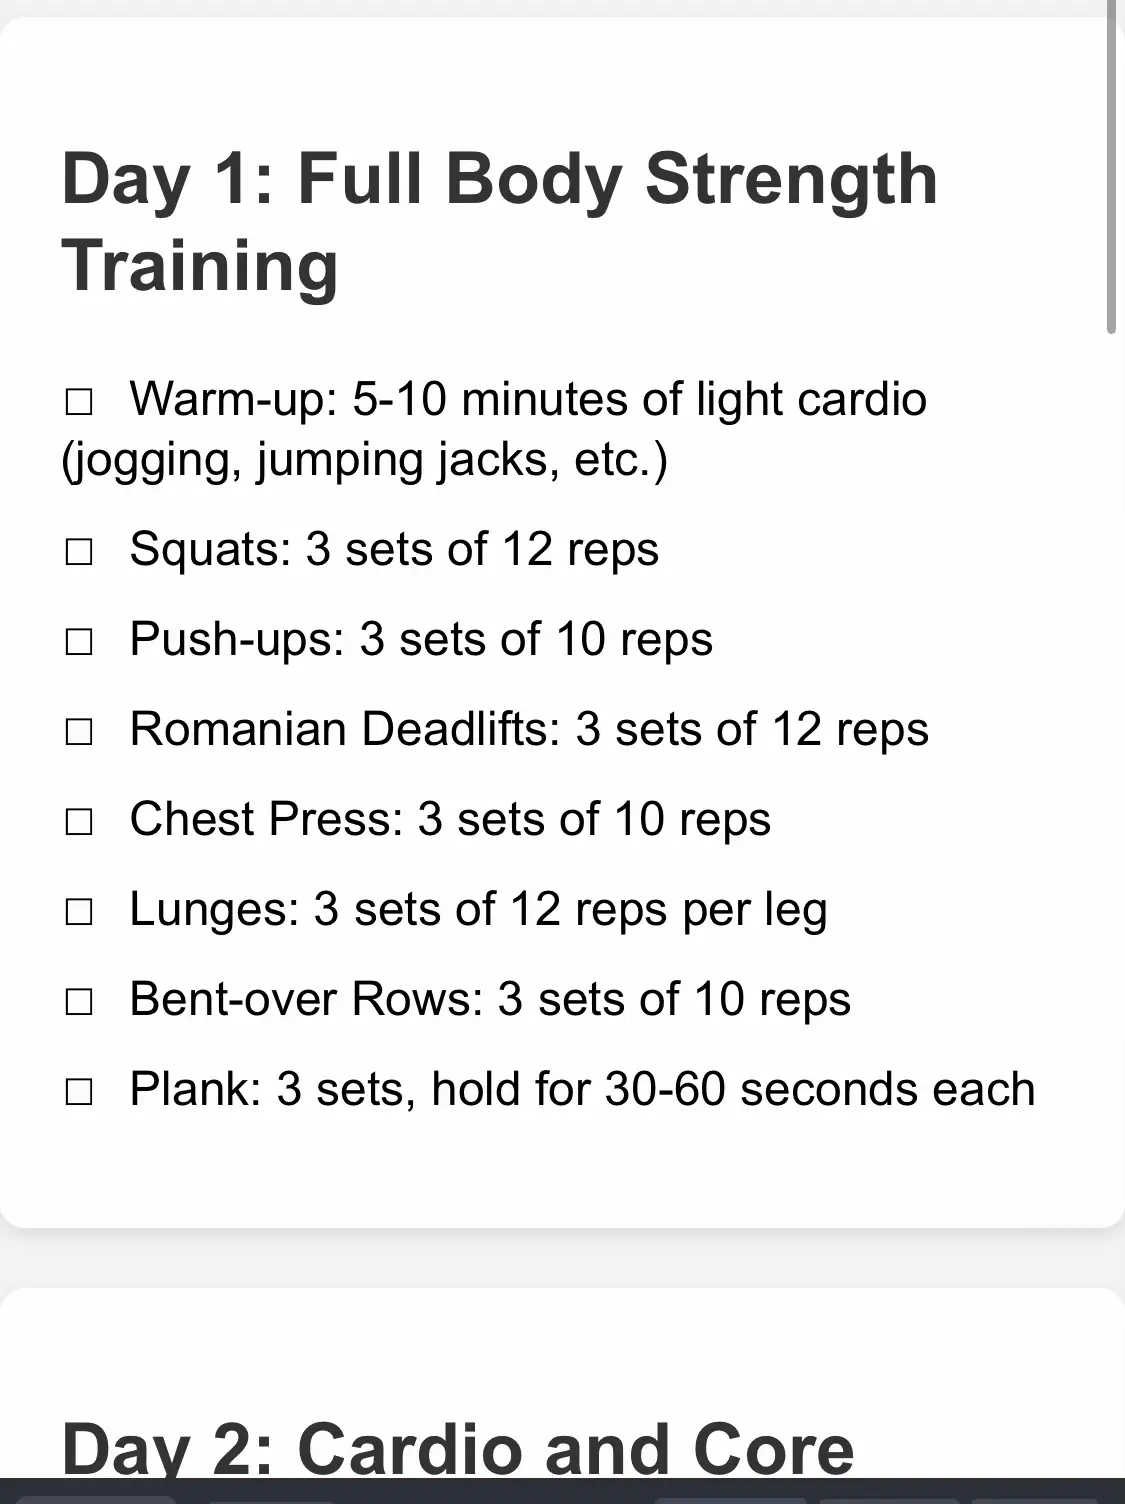 Full Body and Abs Superset Workout - 30 Minutes  FLEX - Day 11  #fullbodyworkout #strengthtraining 